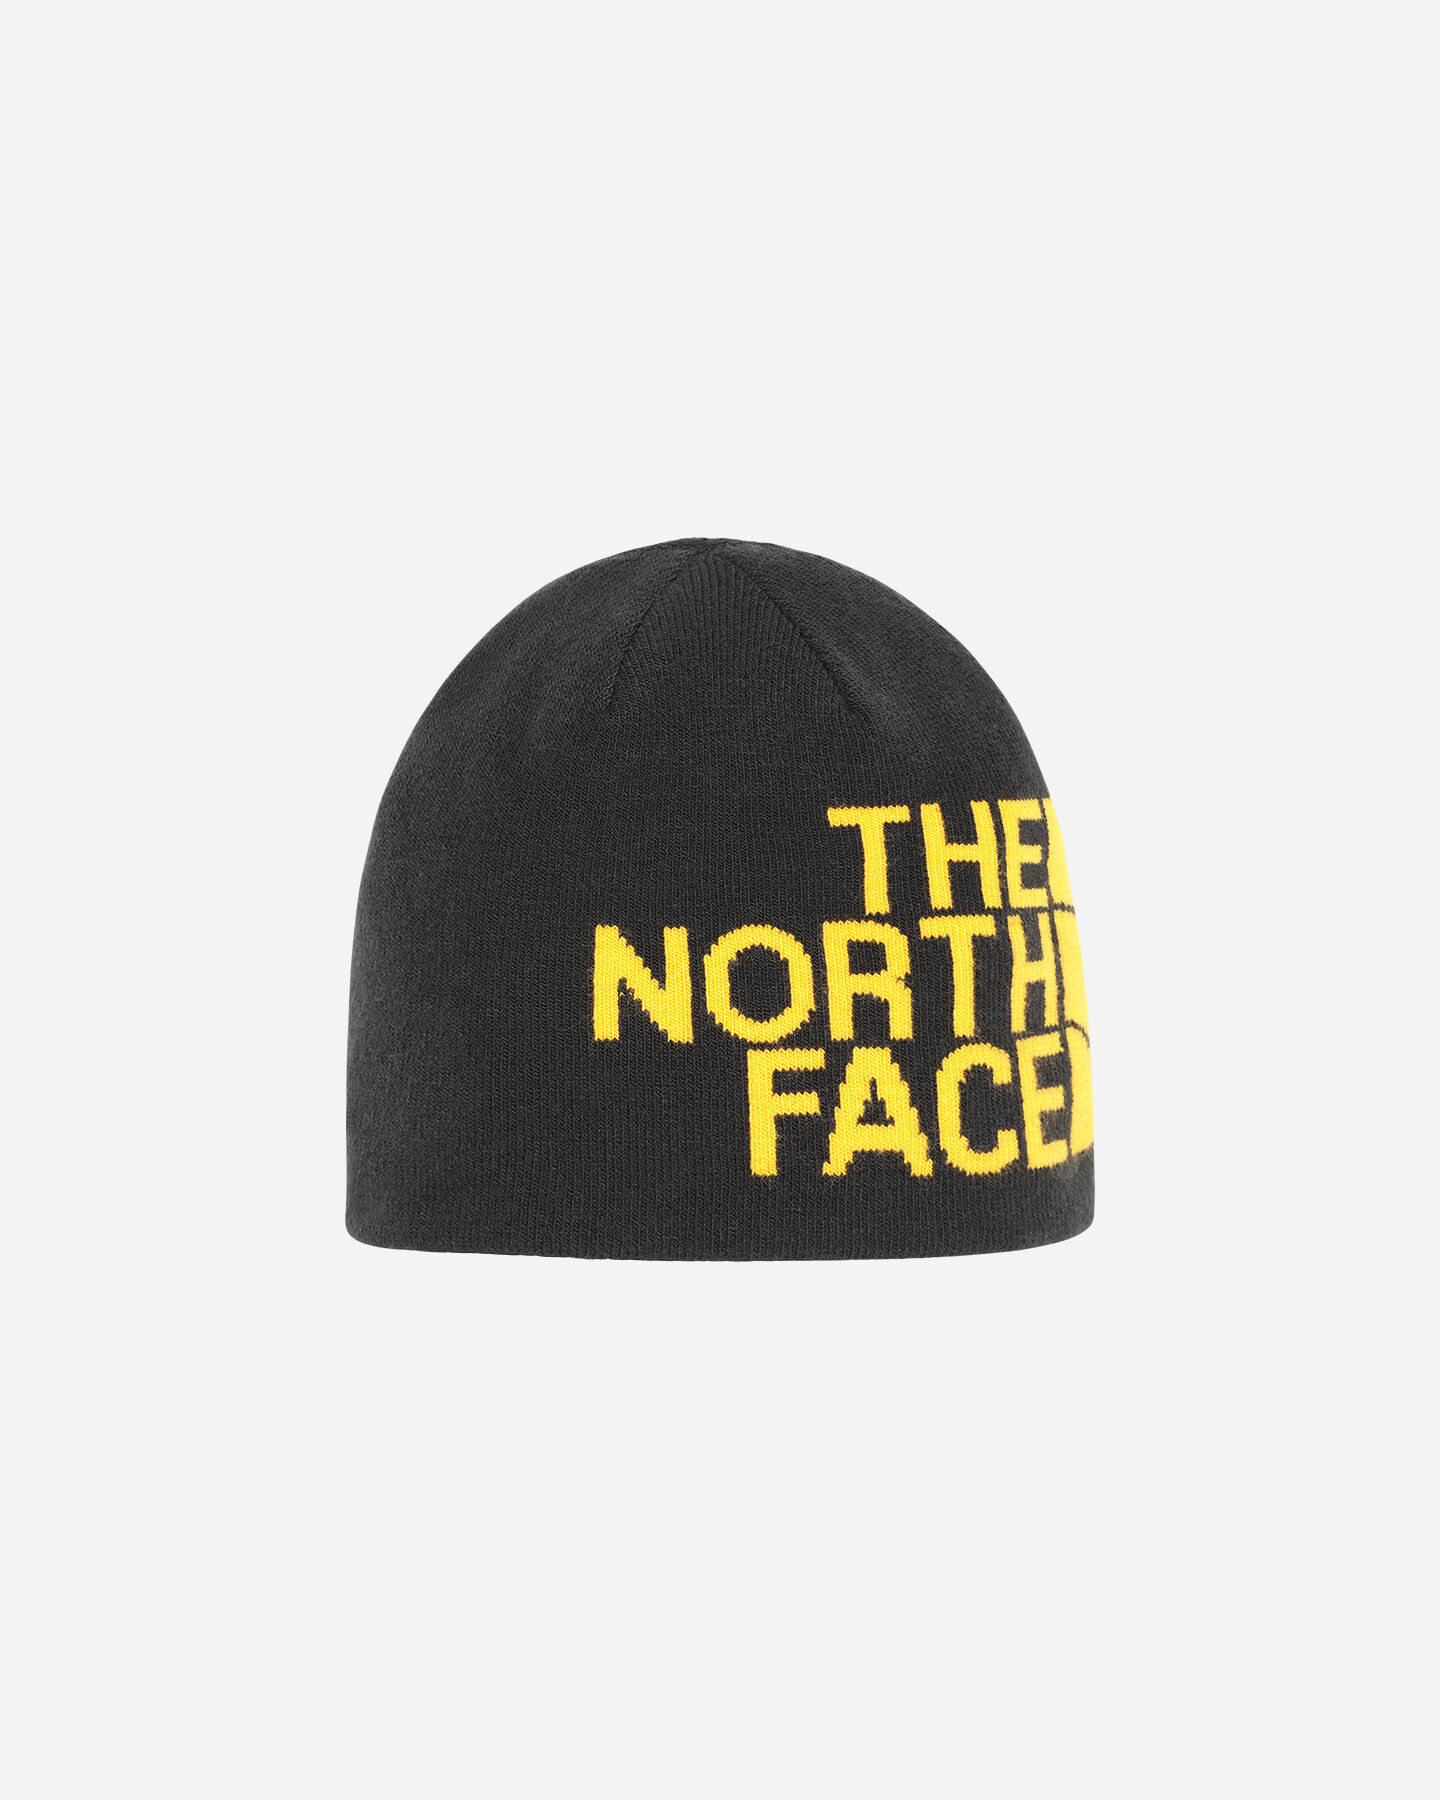  Berretto THE NORTH FACE BANNER DOUBLE-FACE  S5241466|AGG|OS scatto 0